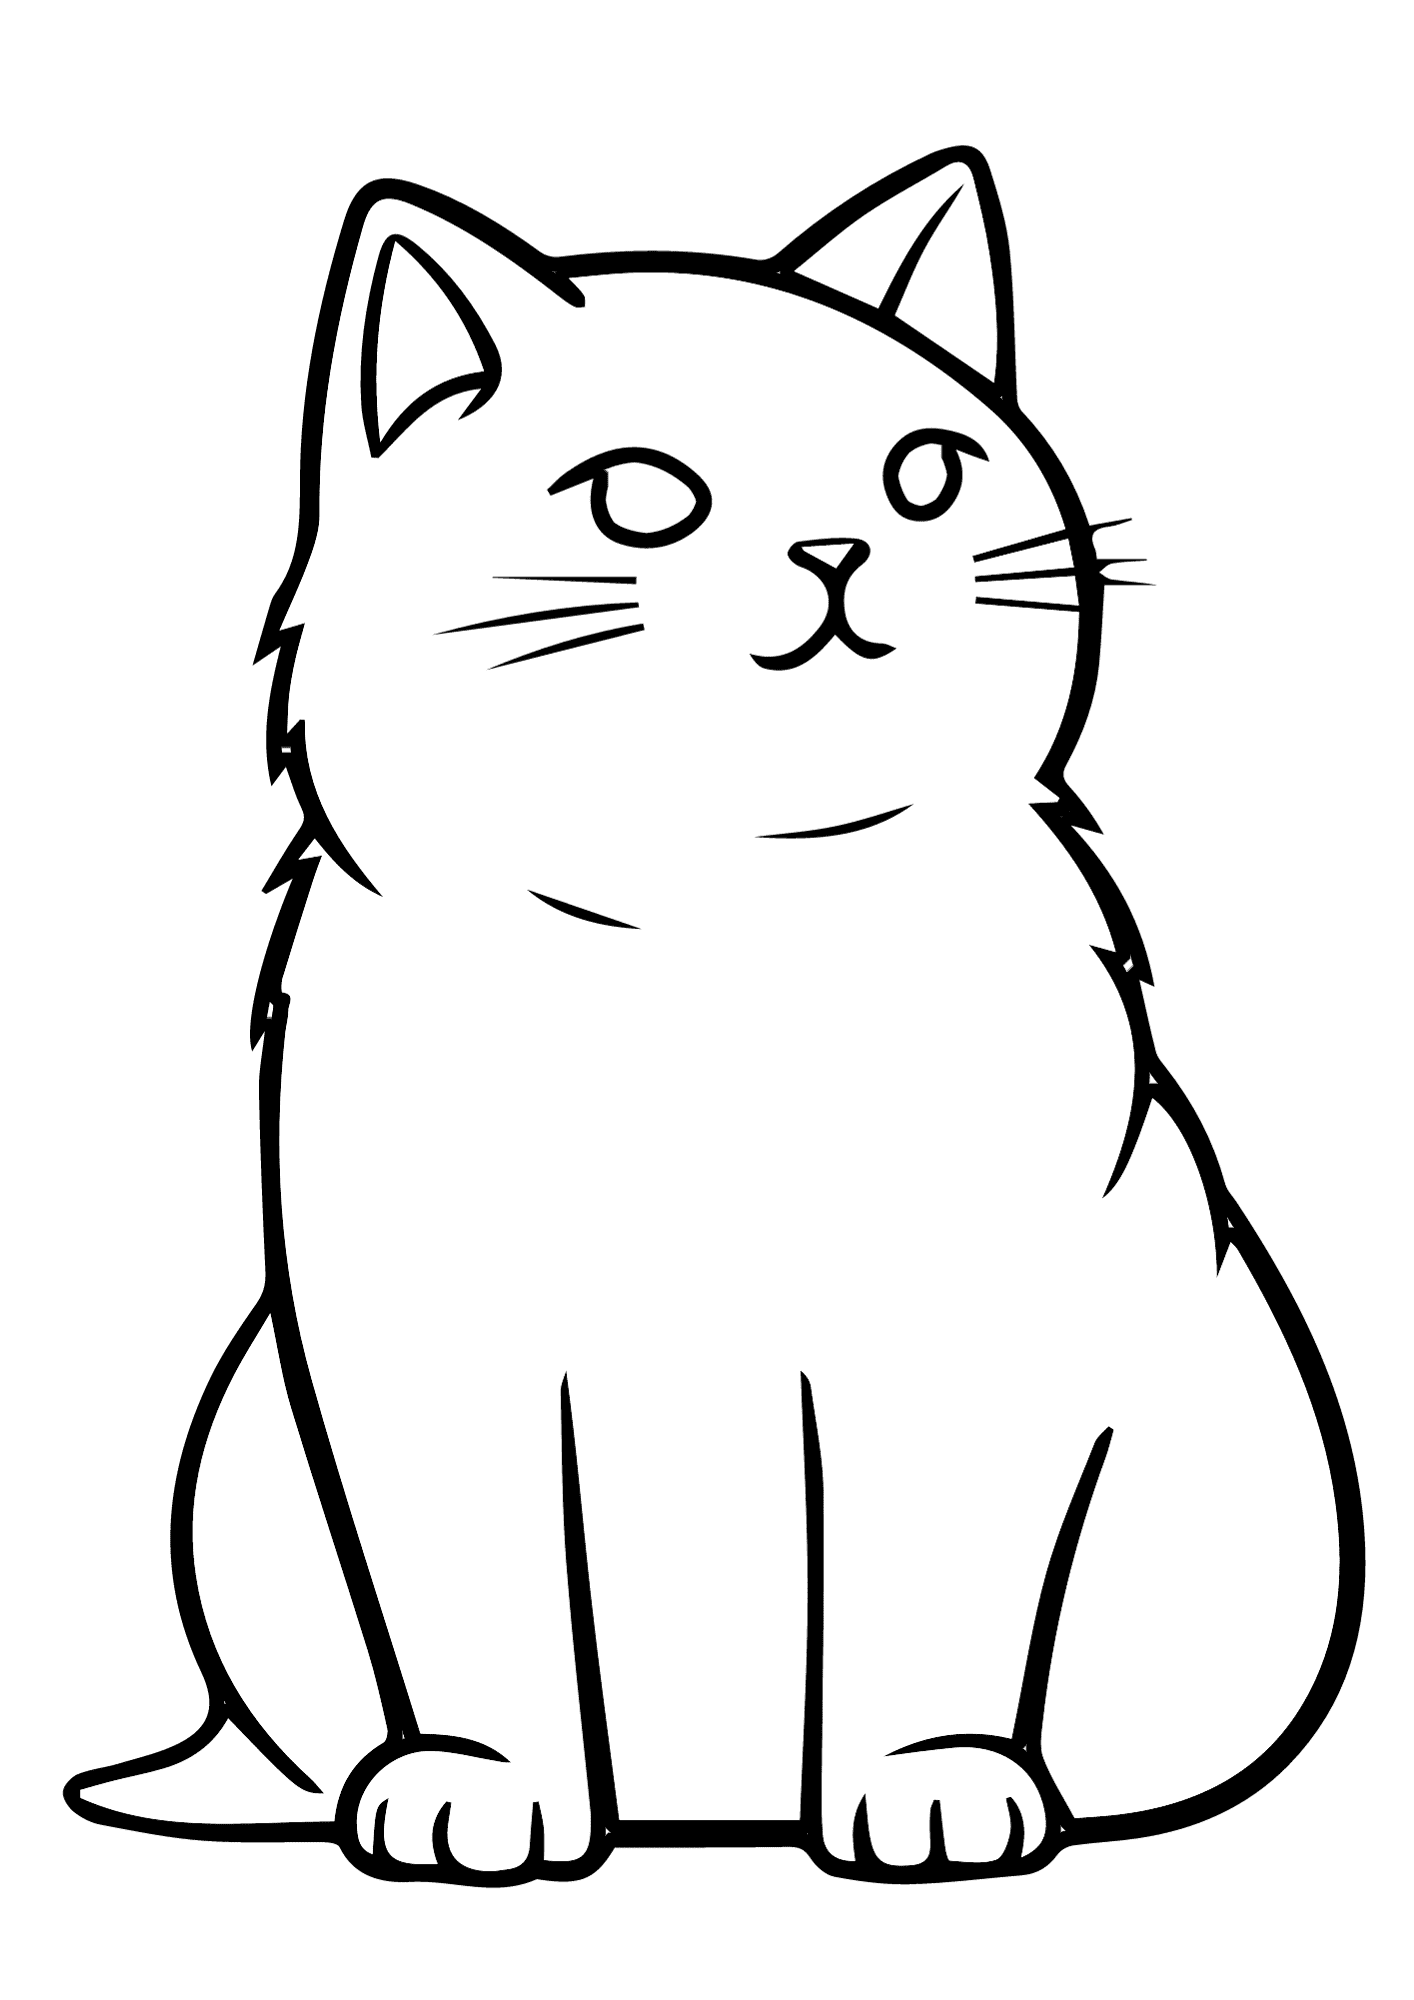 Cat Coloring Page For Children